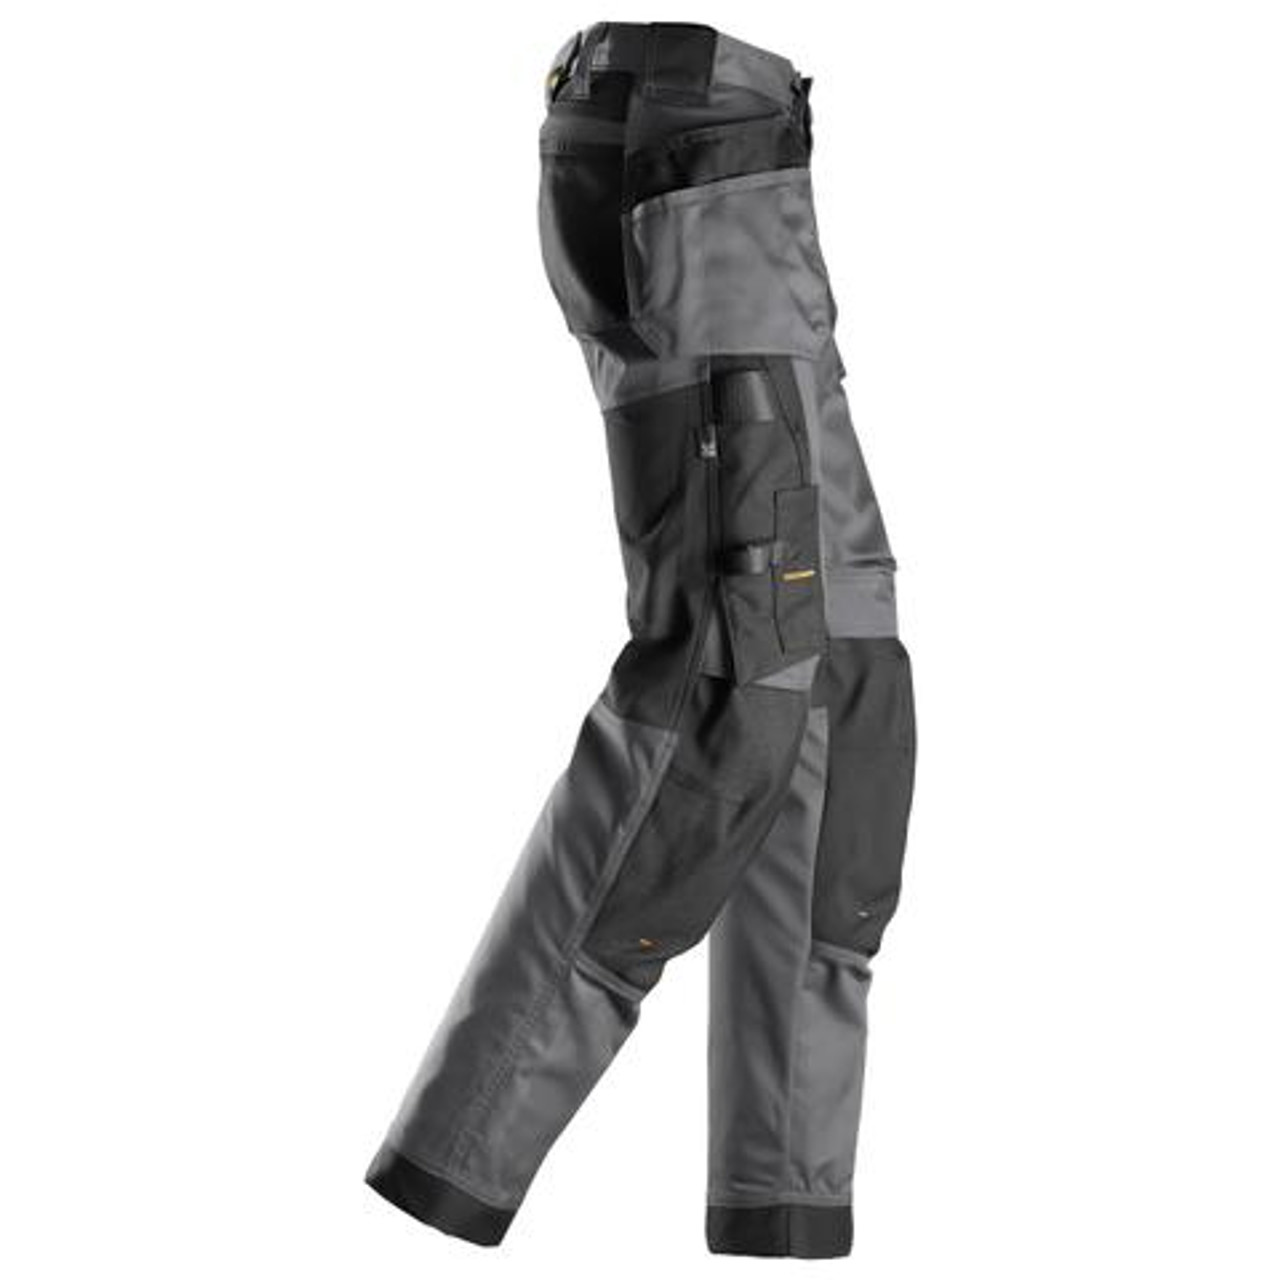 Suitable work Trousers available in SNICKERS Trousers 6247 with Kneepad Pockets for Plumbing